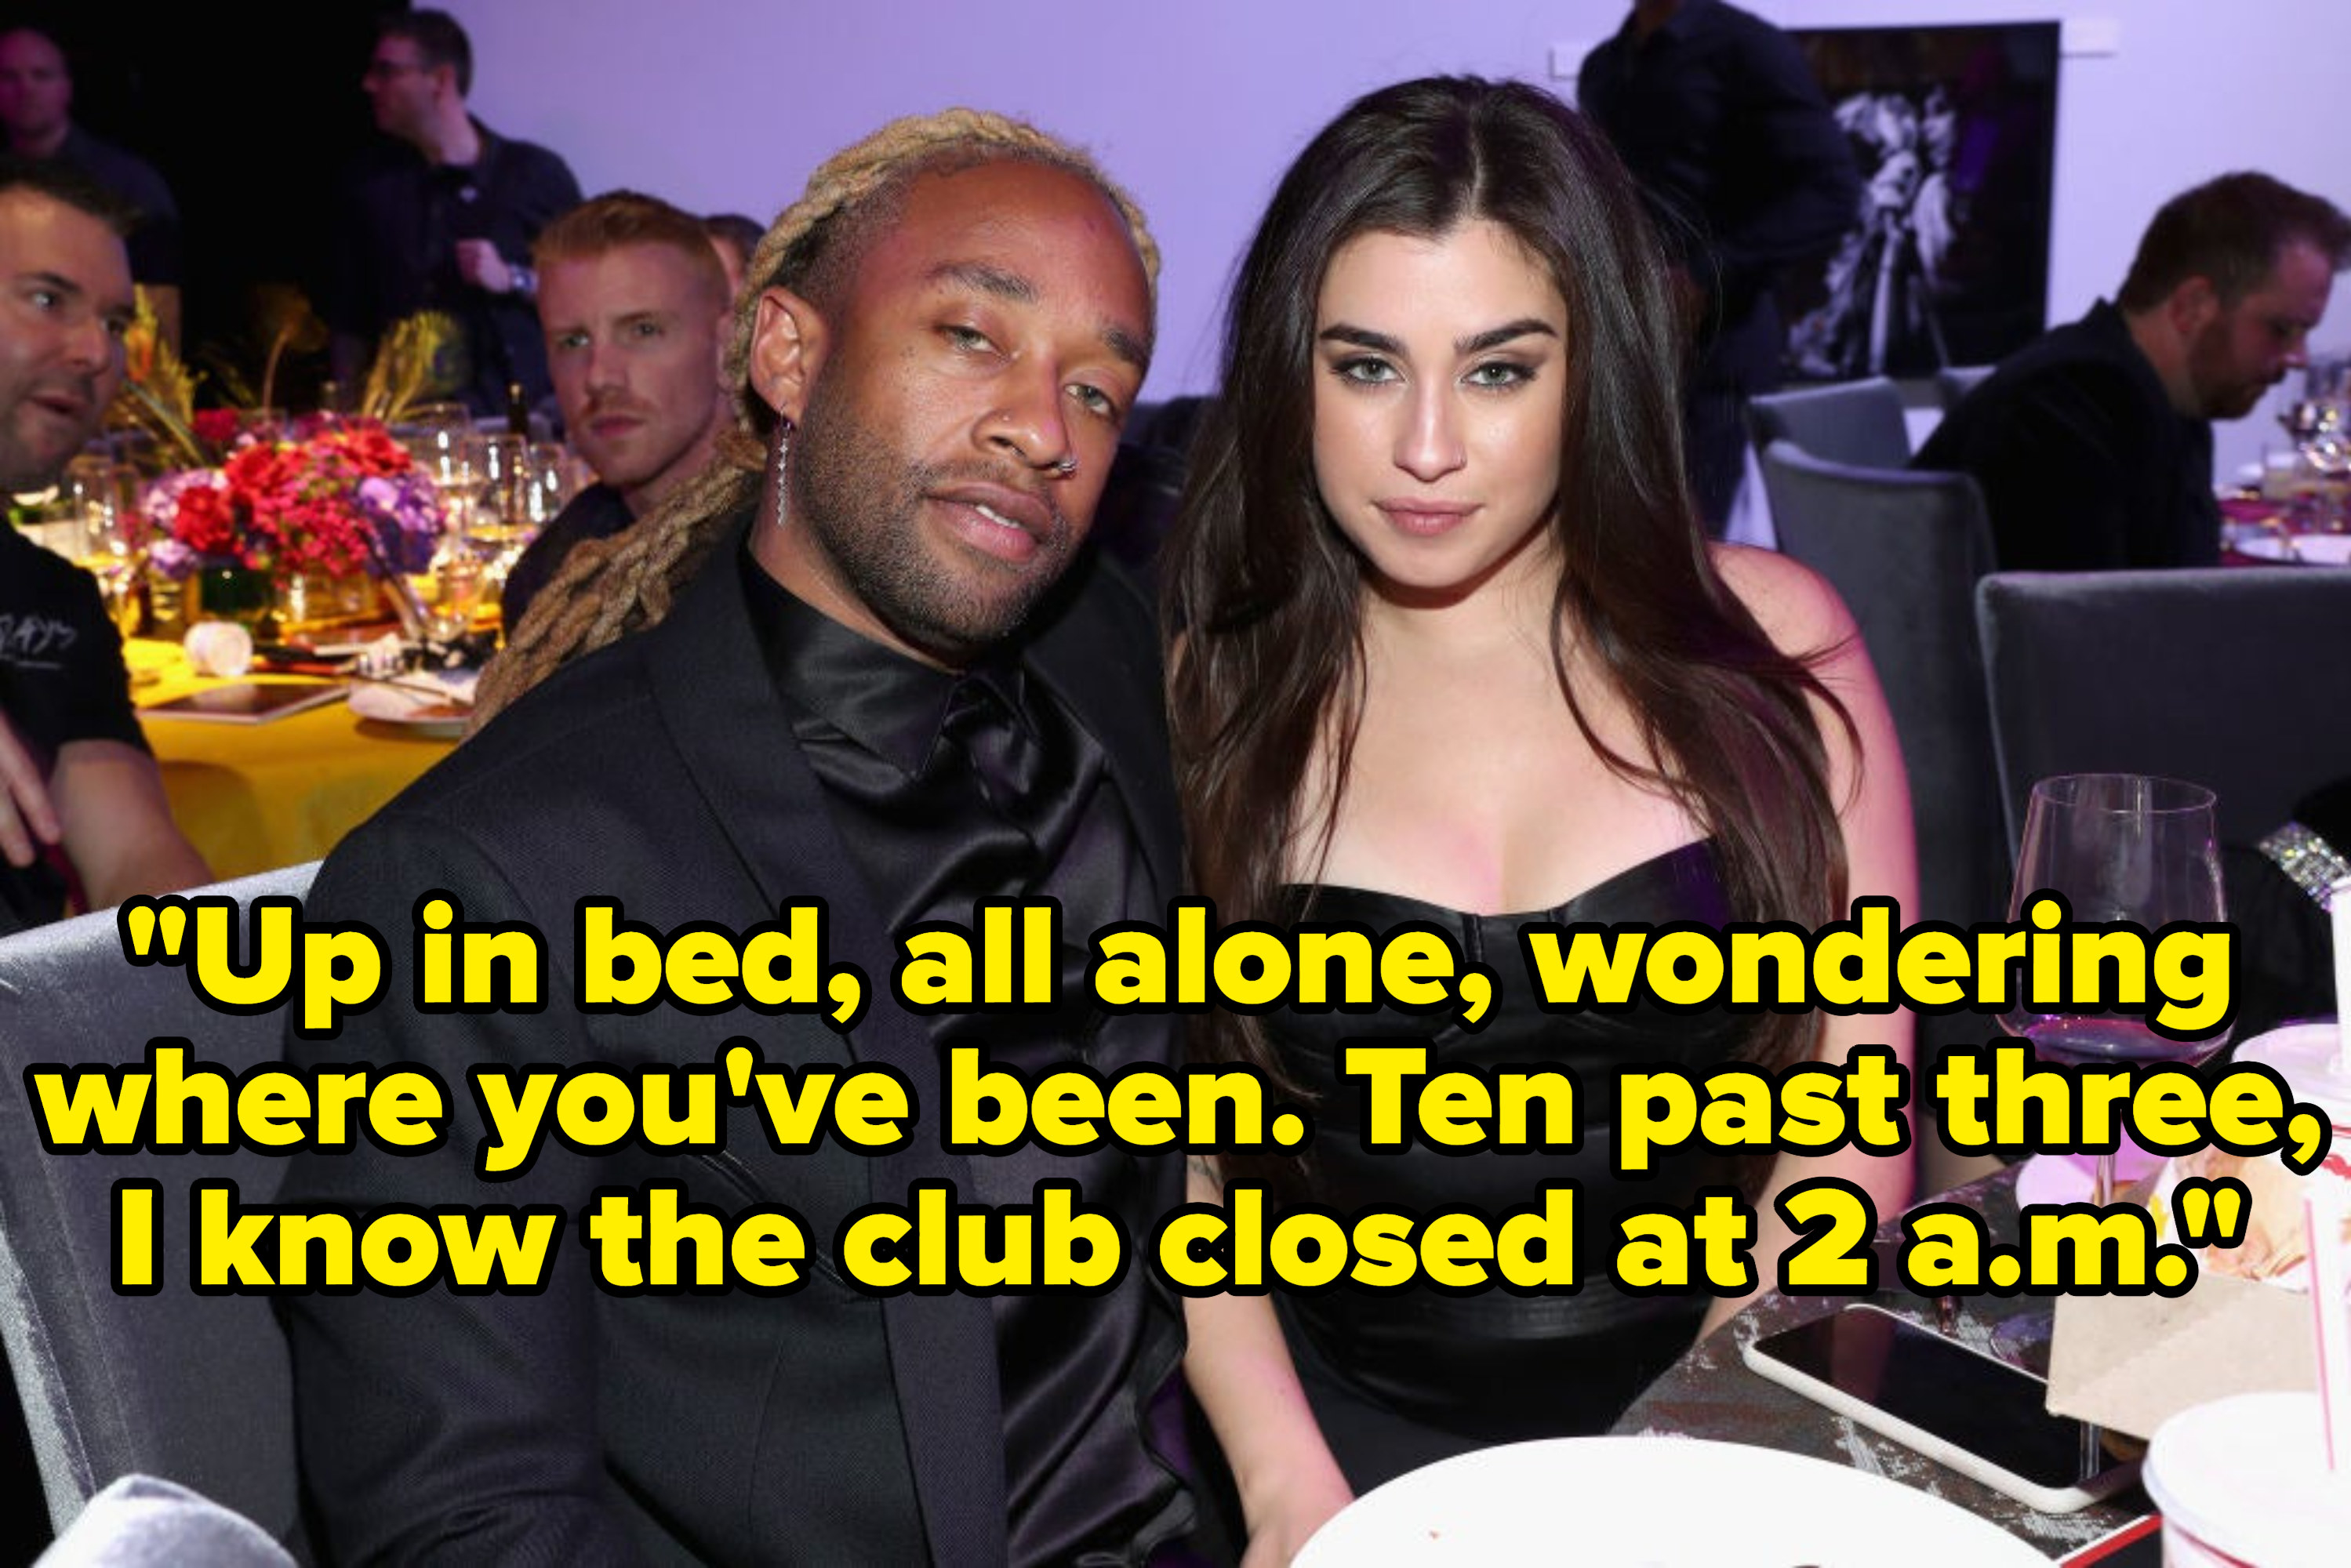 Ty Dolla $ign and Lauren Jauregui posing together, captioned with the lyrics &quot;Up in bed, all alone, wondering where you&#x27;be been. Ten past three, I know thee club closed at 2 a.m.&quot;